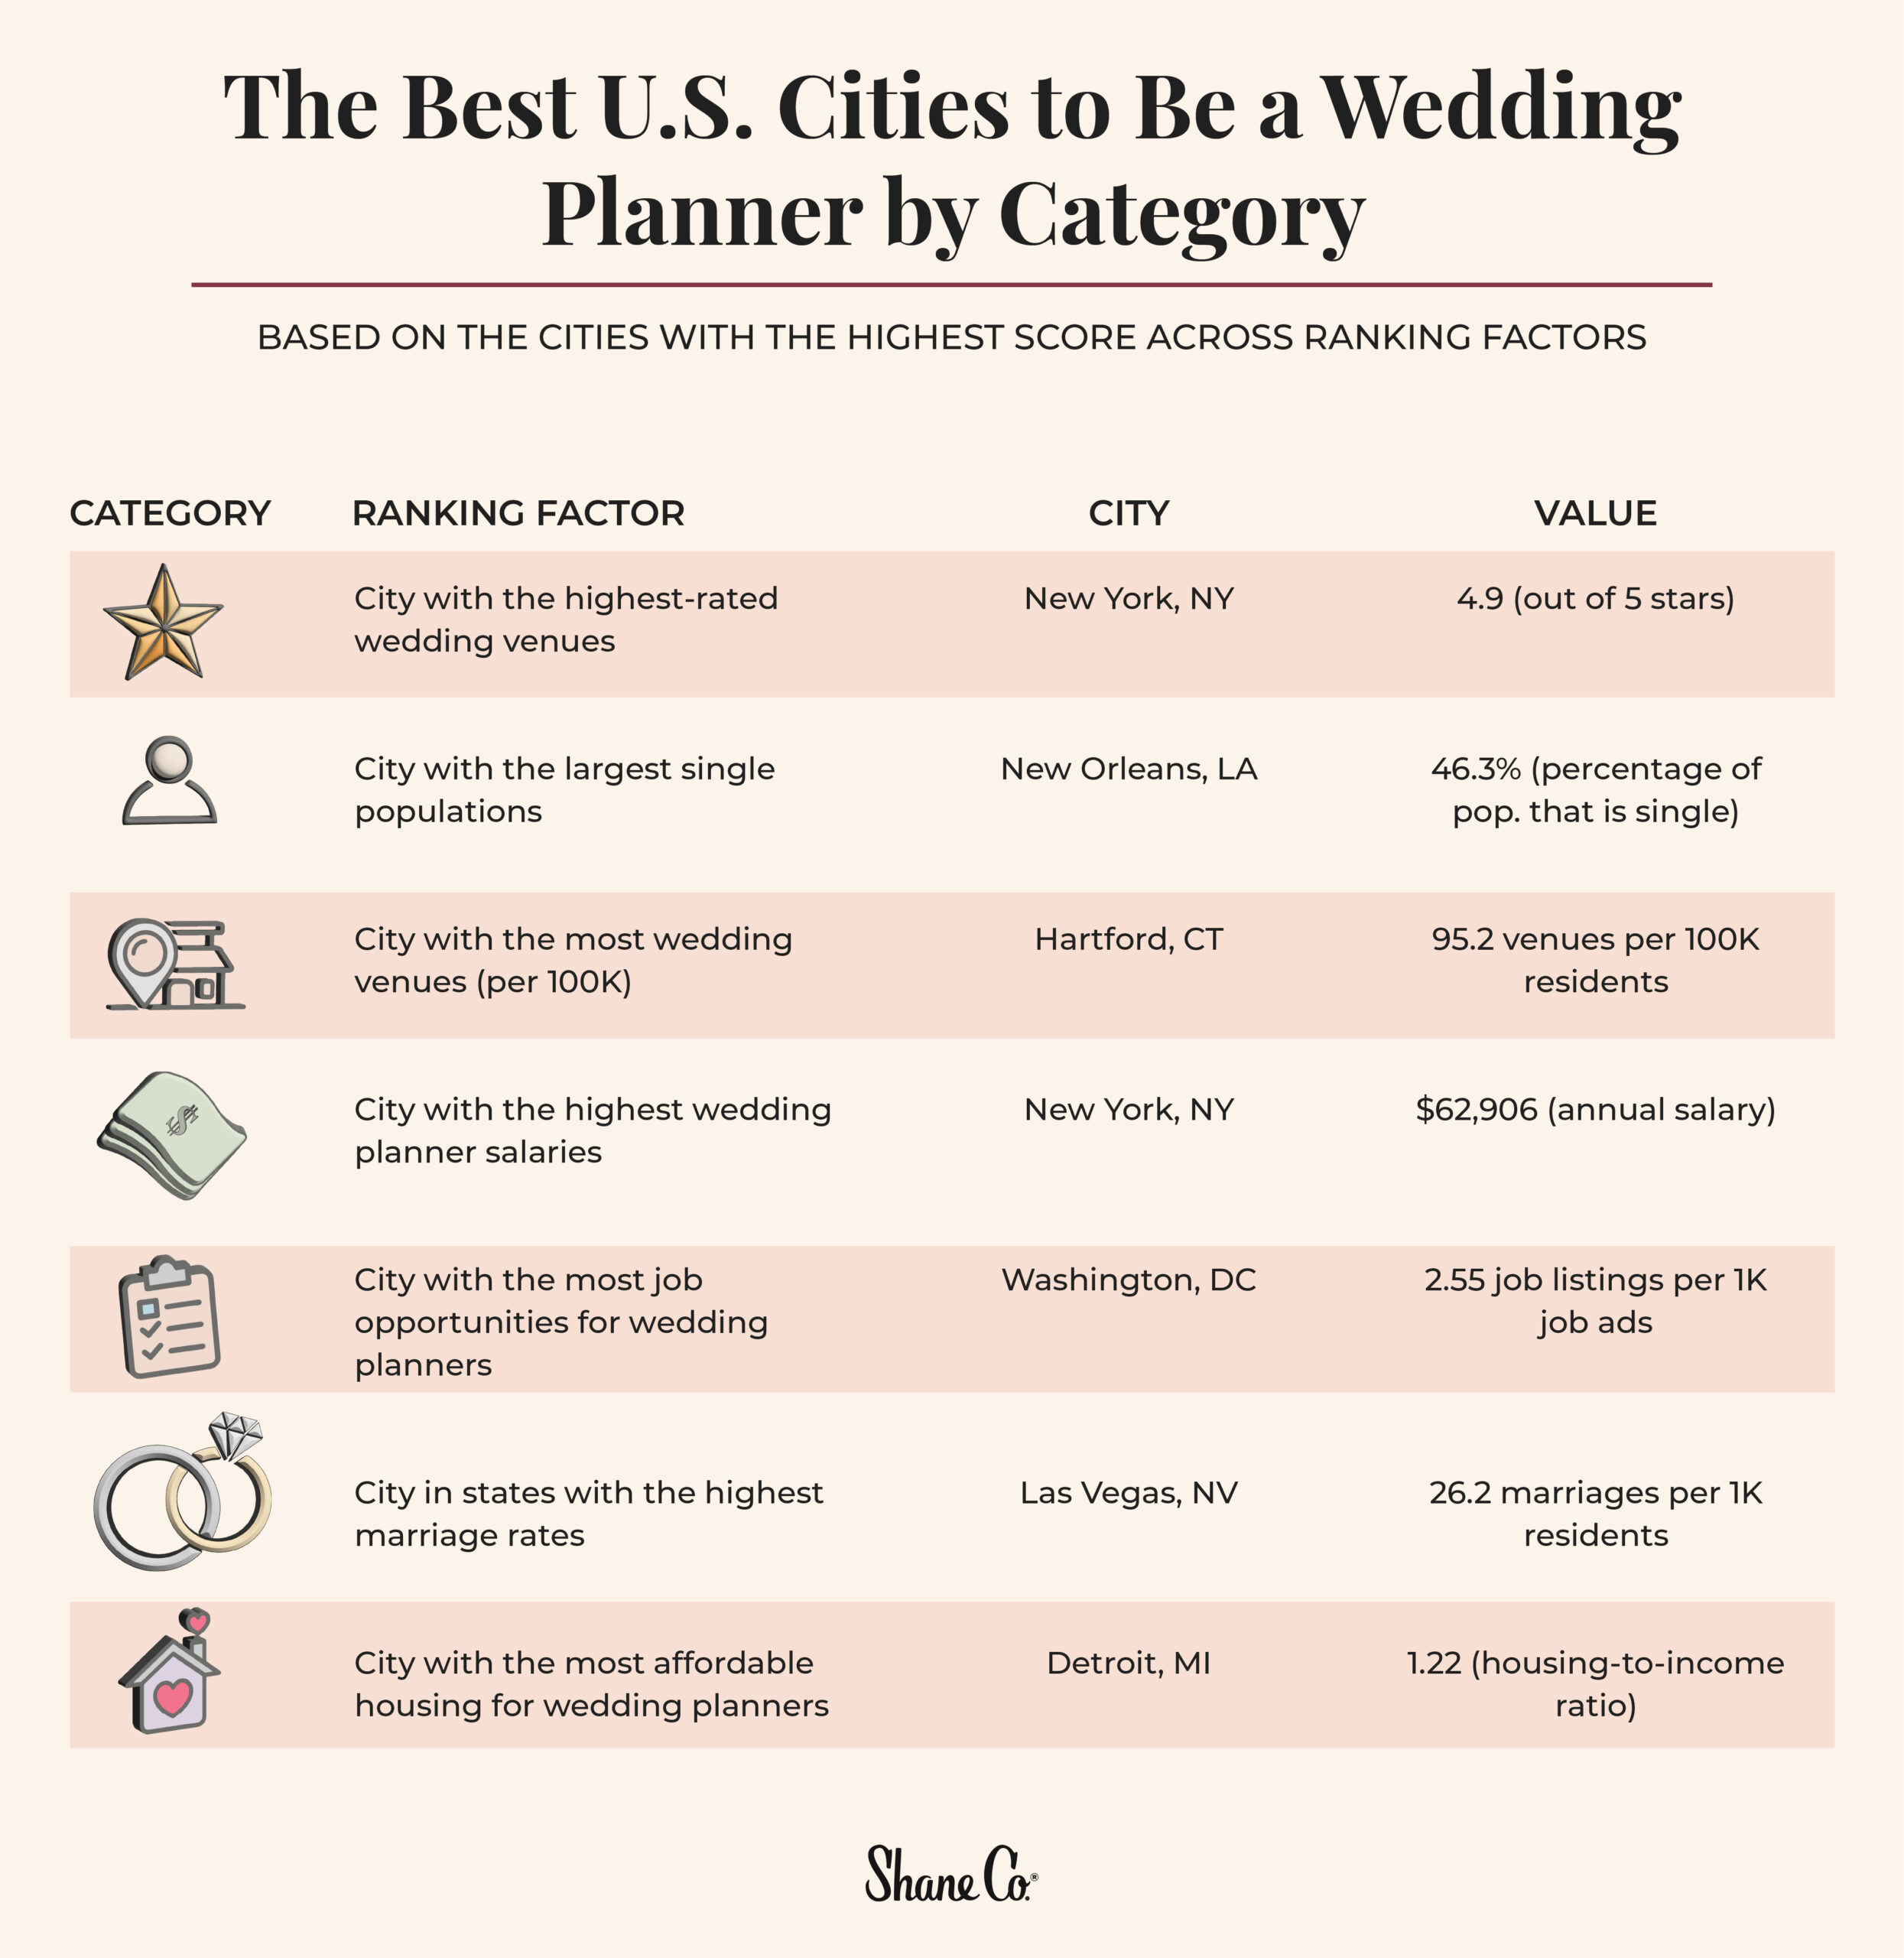 chart listing the best cities to be a wedding planner by individual ranking factors